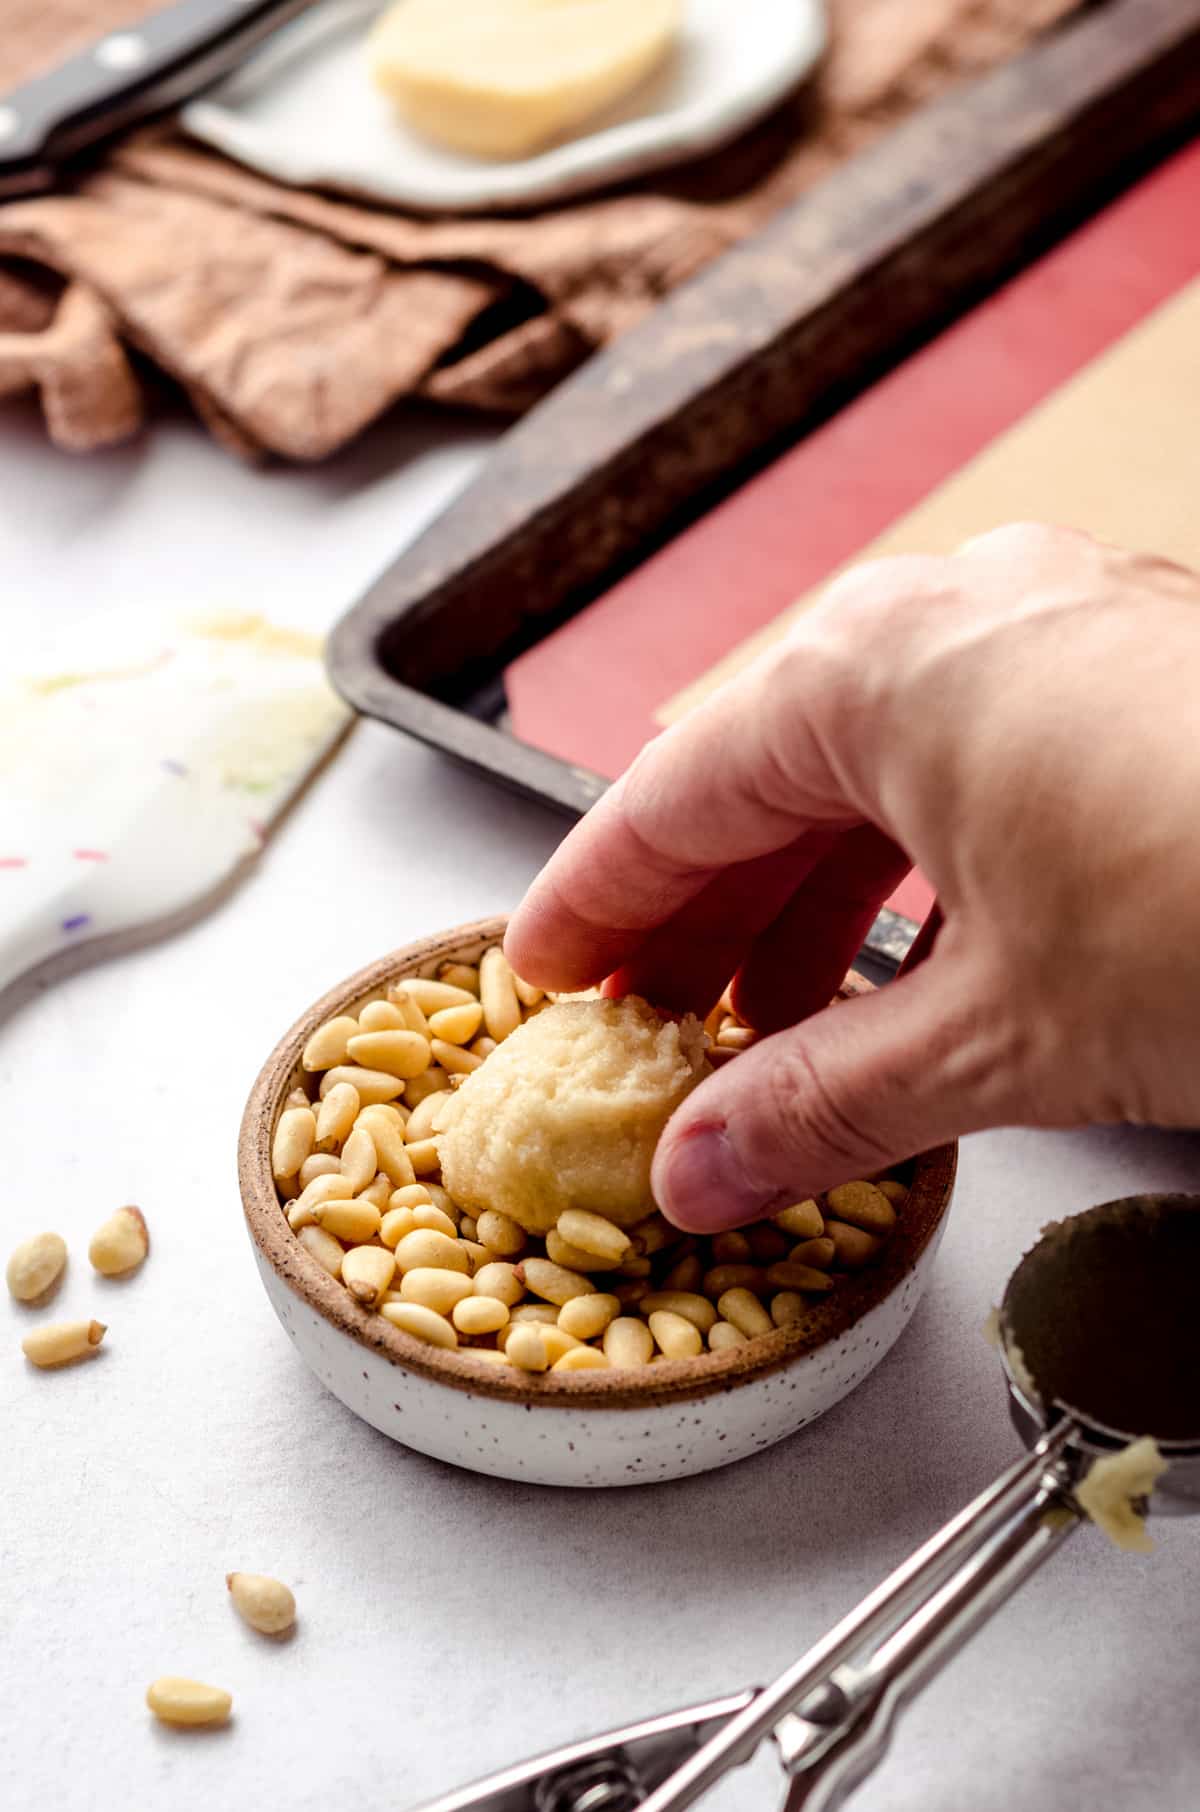 Coating a cookie dough ball with pine nuts.